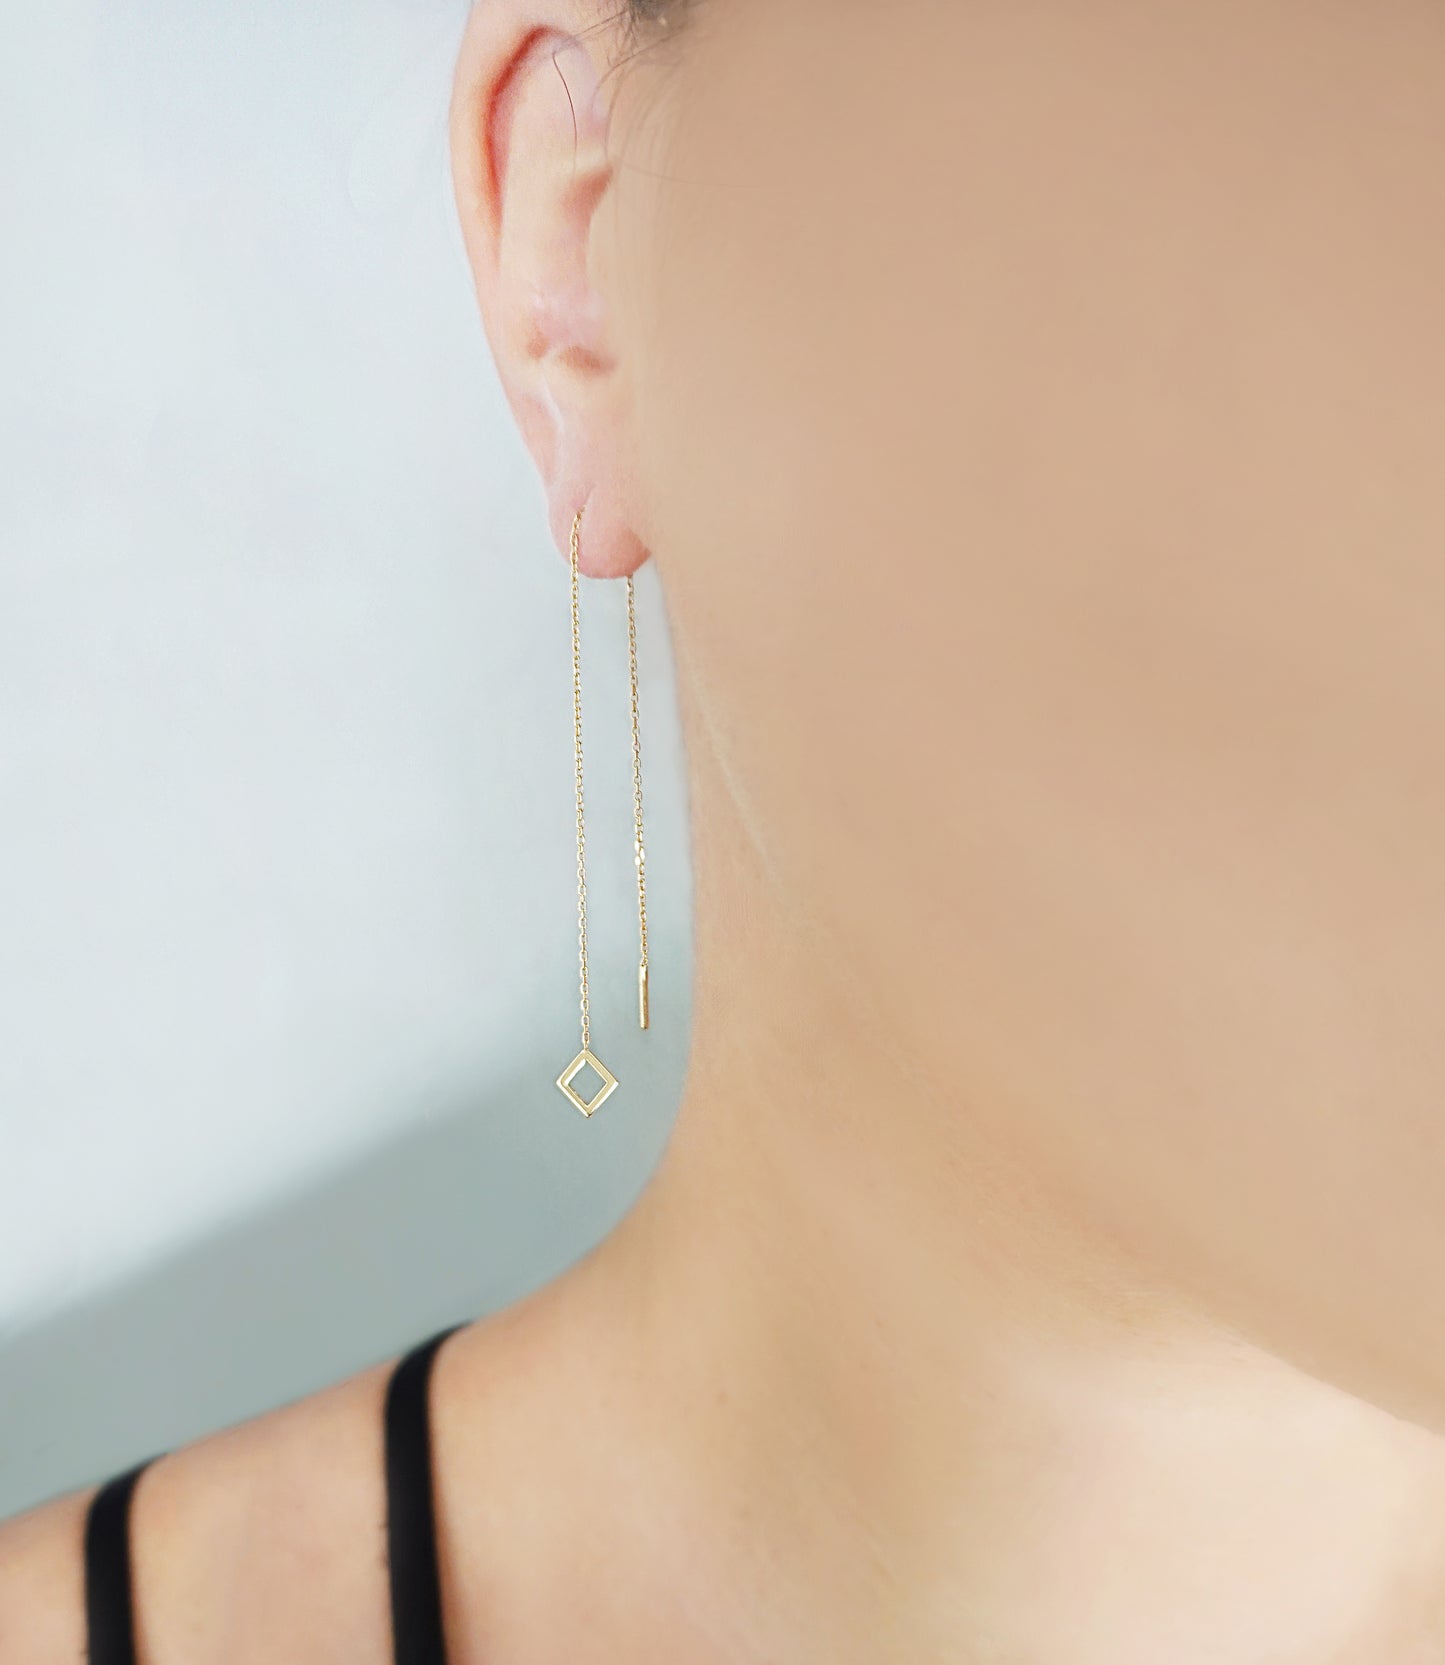 Solid Gold Threader Earrings with a Dainty Rhombus